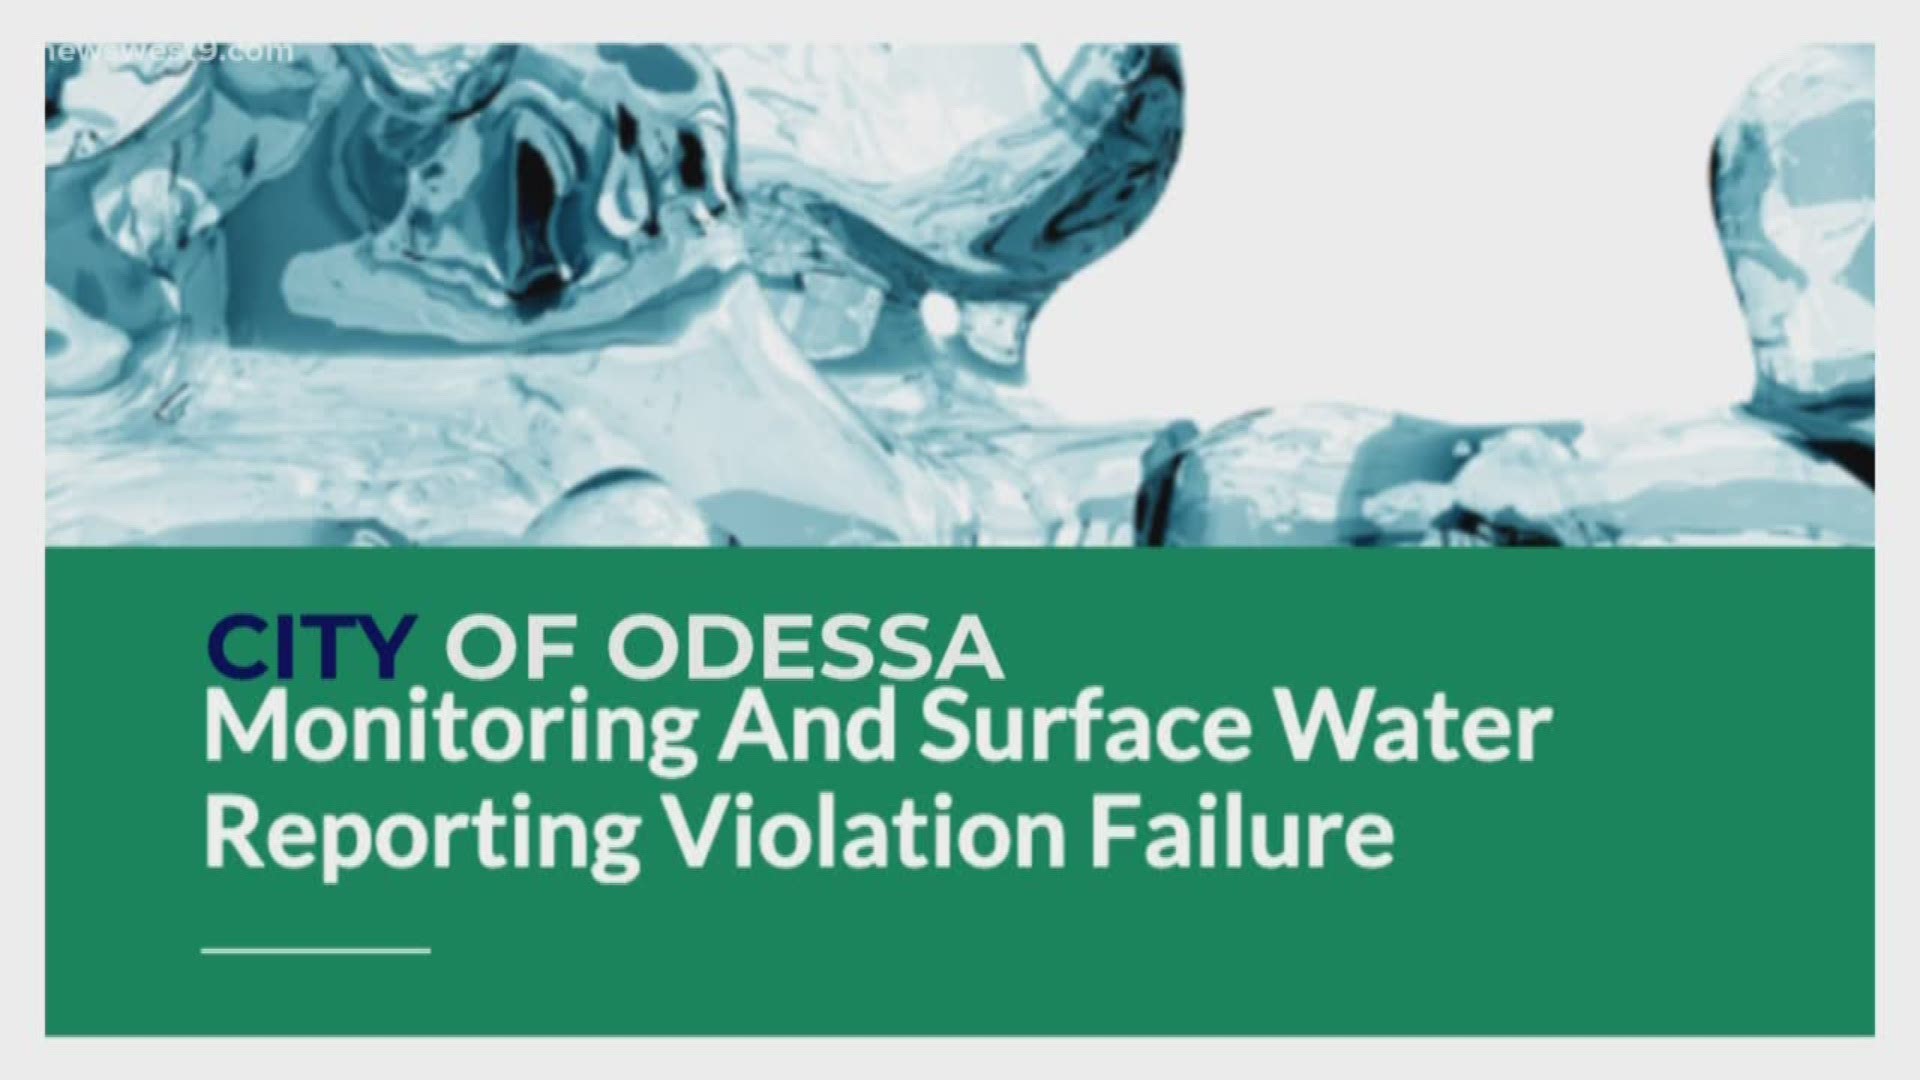 The City of Odessa has posted a notice on its website notifying people that they violated requirements for monitoring and surface water reporting.